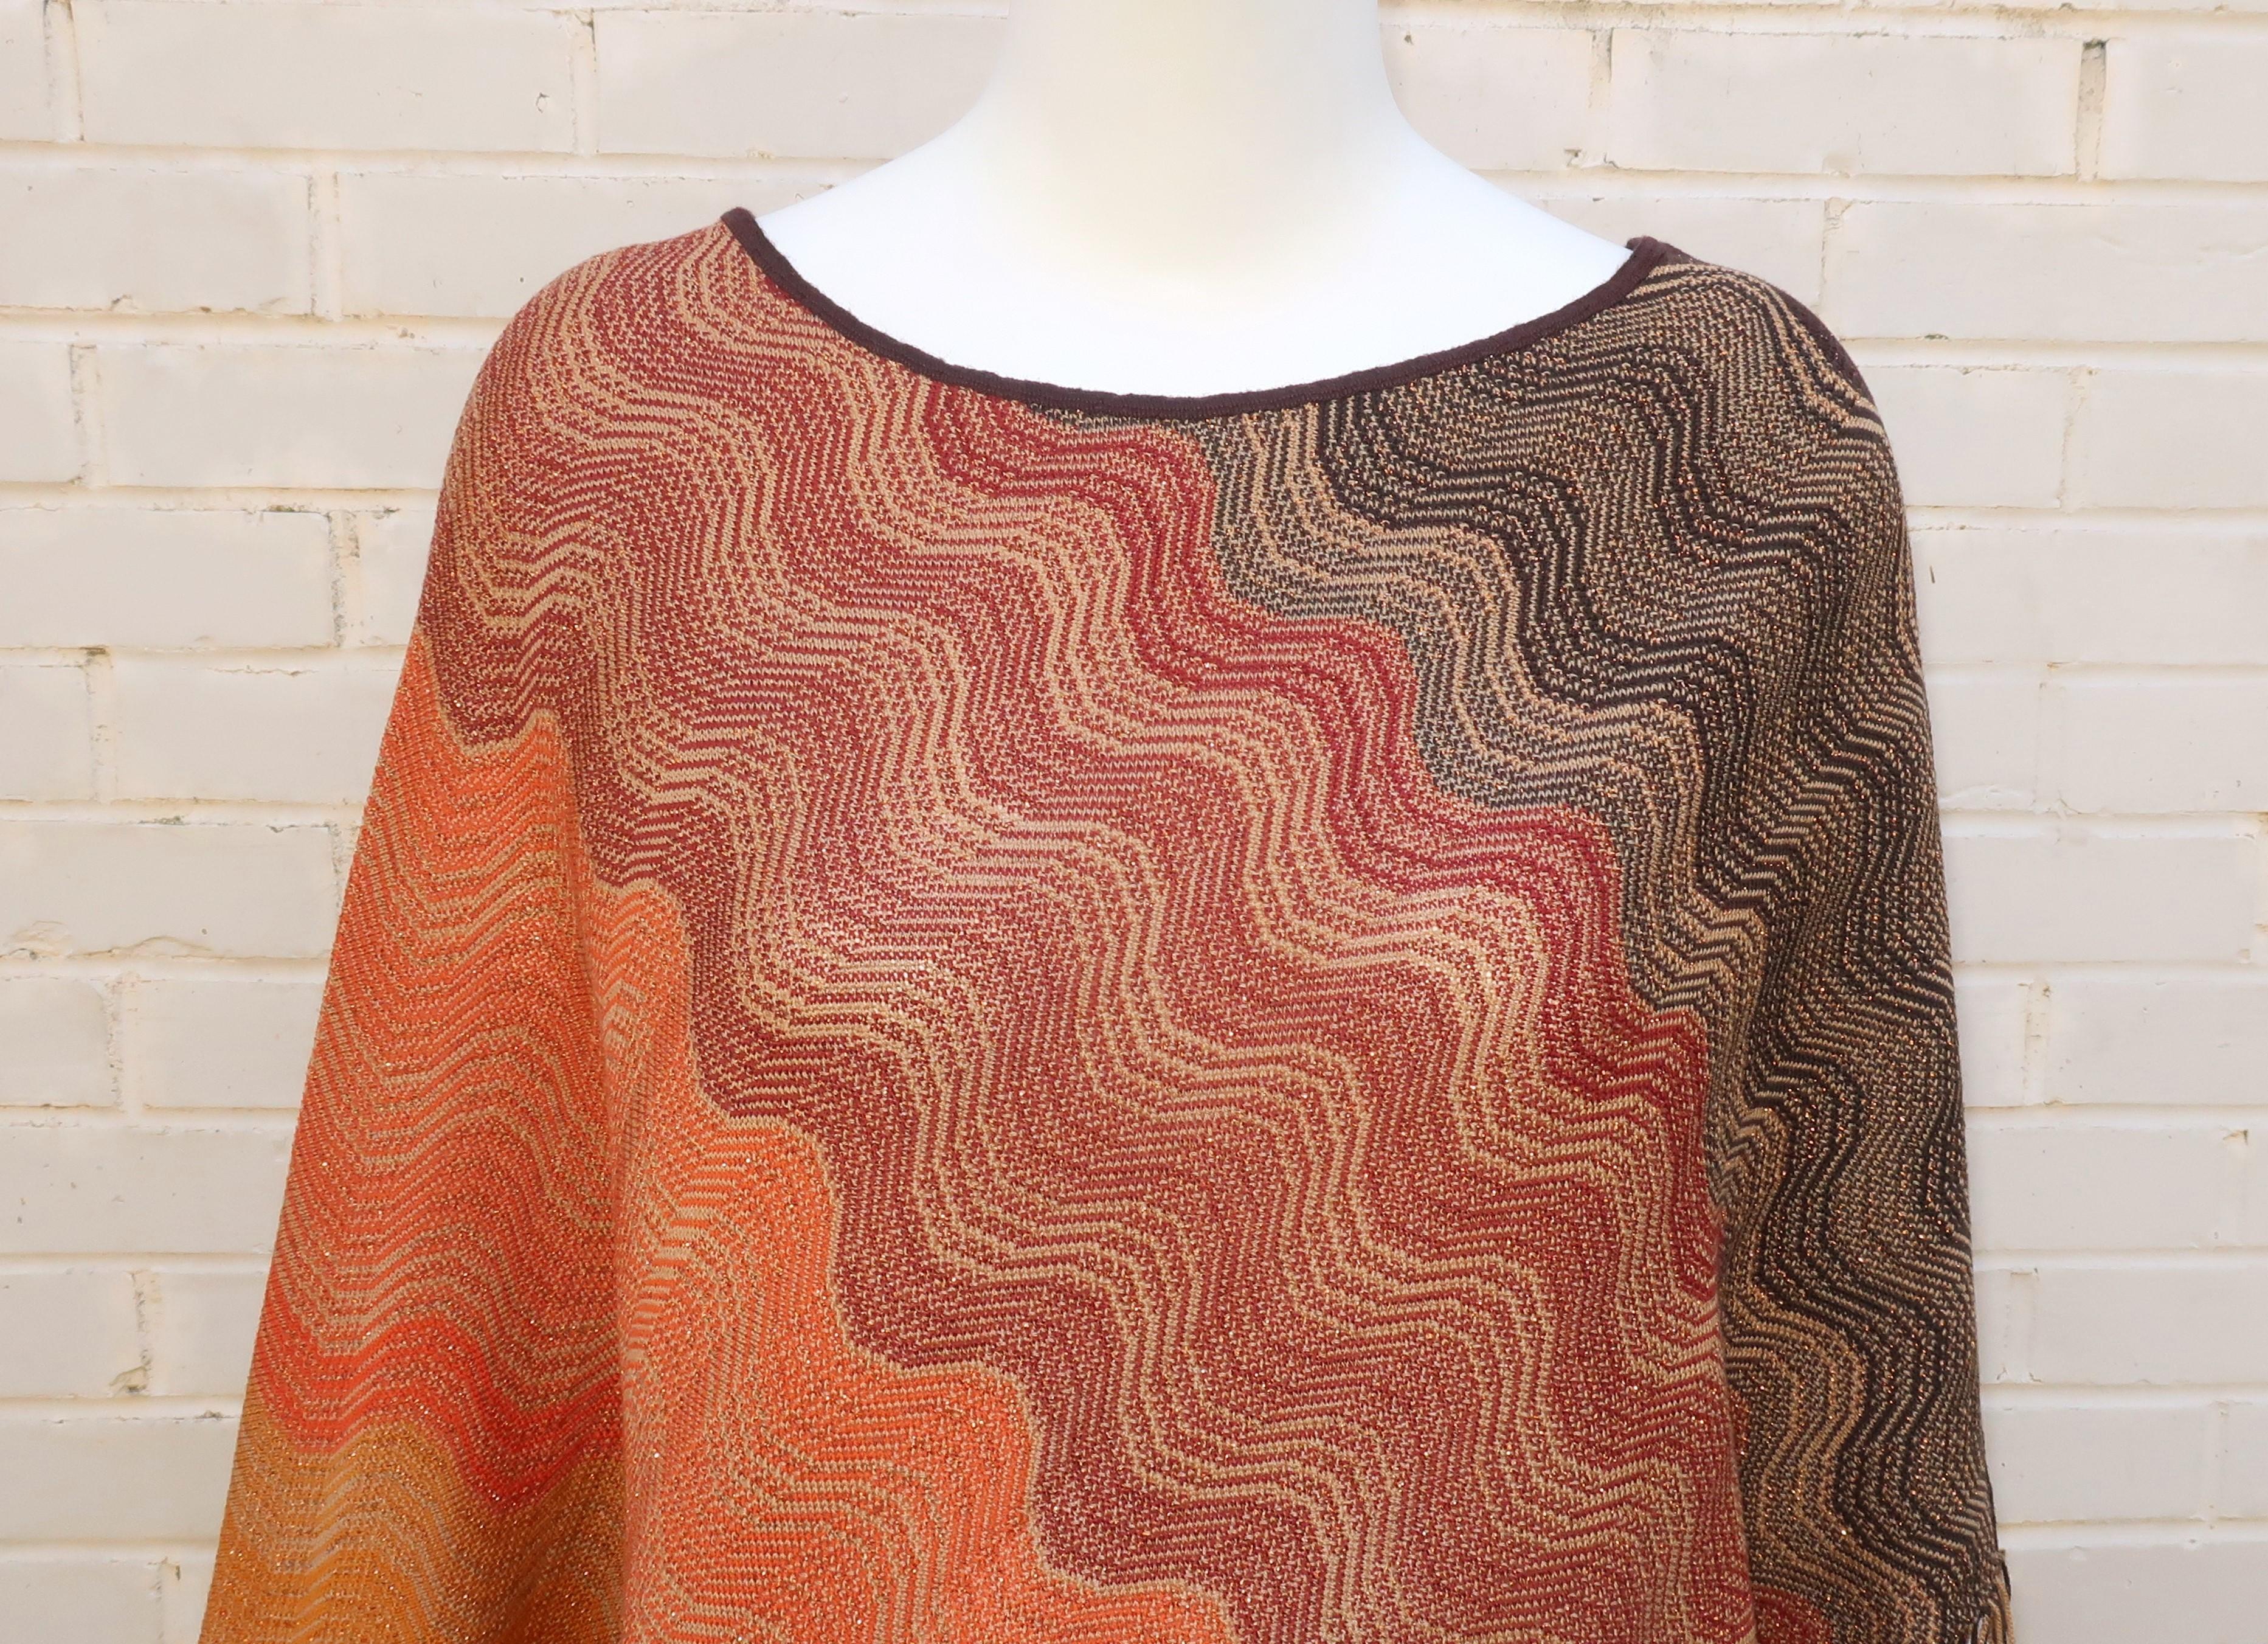 MISSONI Brown Wool Poncho Sweater With Copper Metallic Threading In Good Condition For Sale In Atlanta, GA